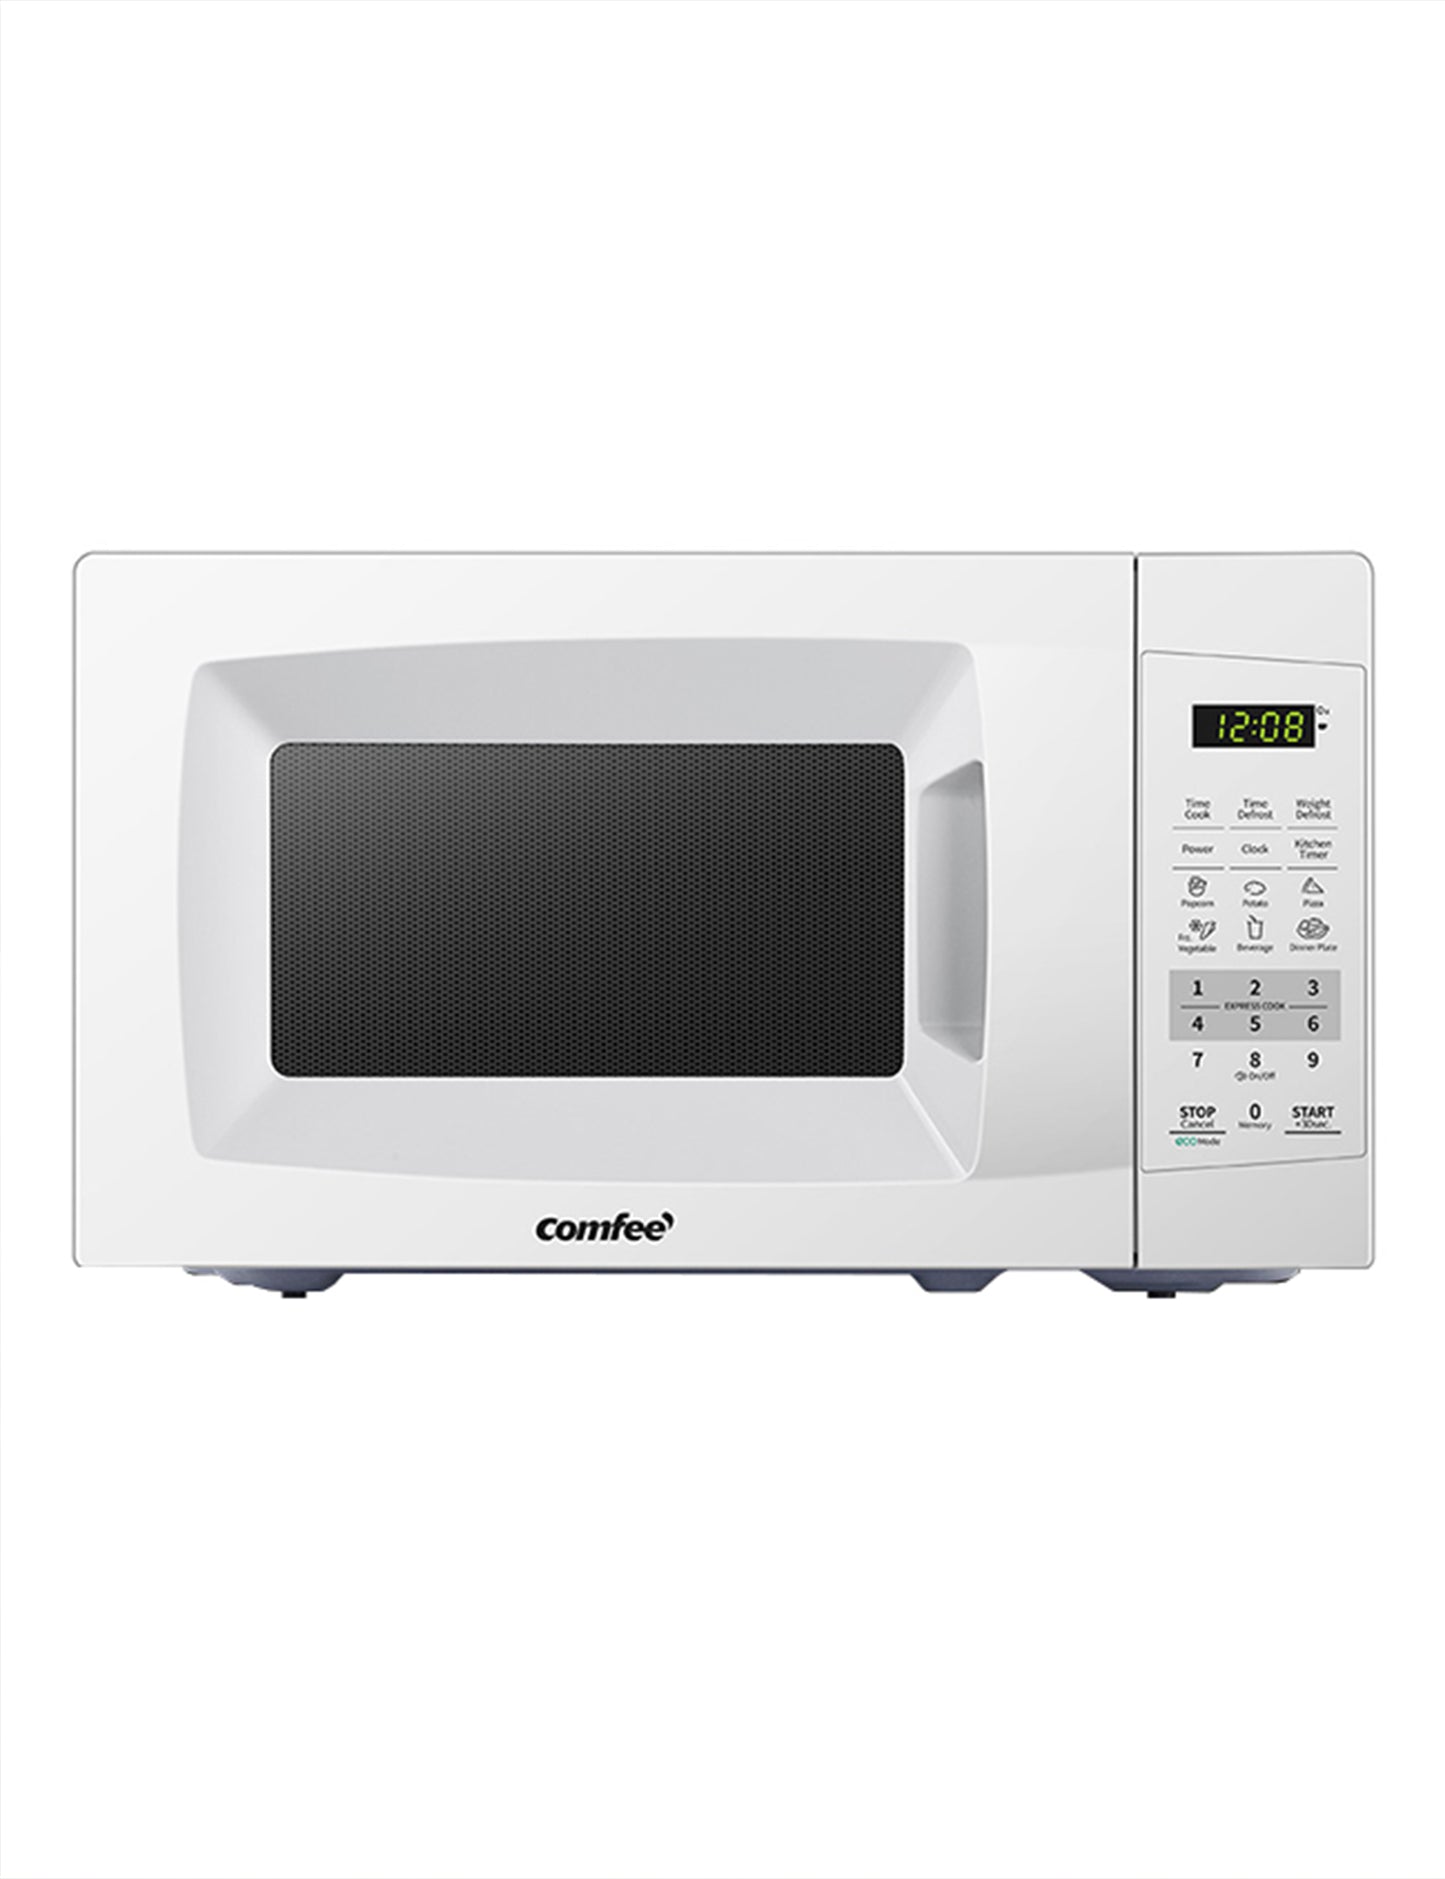 small white comfee microwave oven